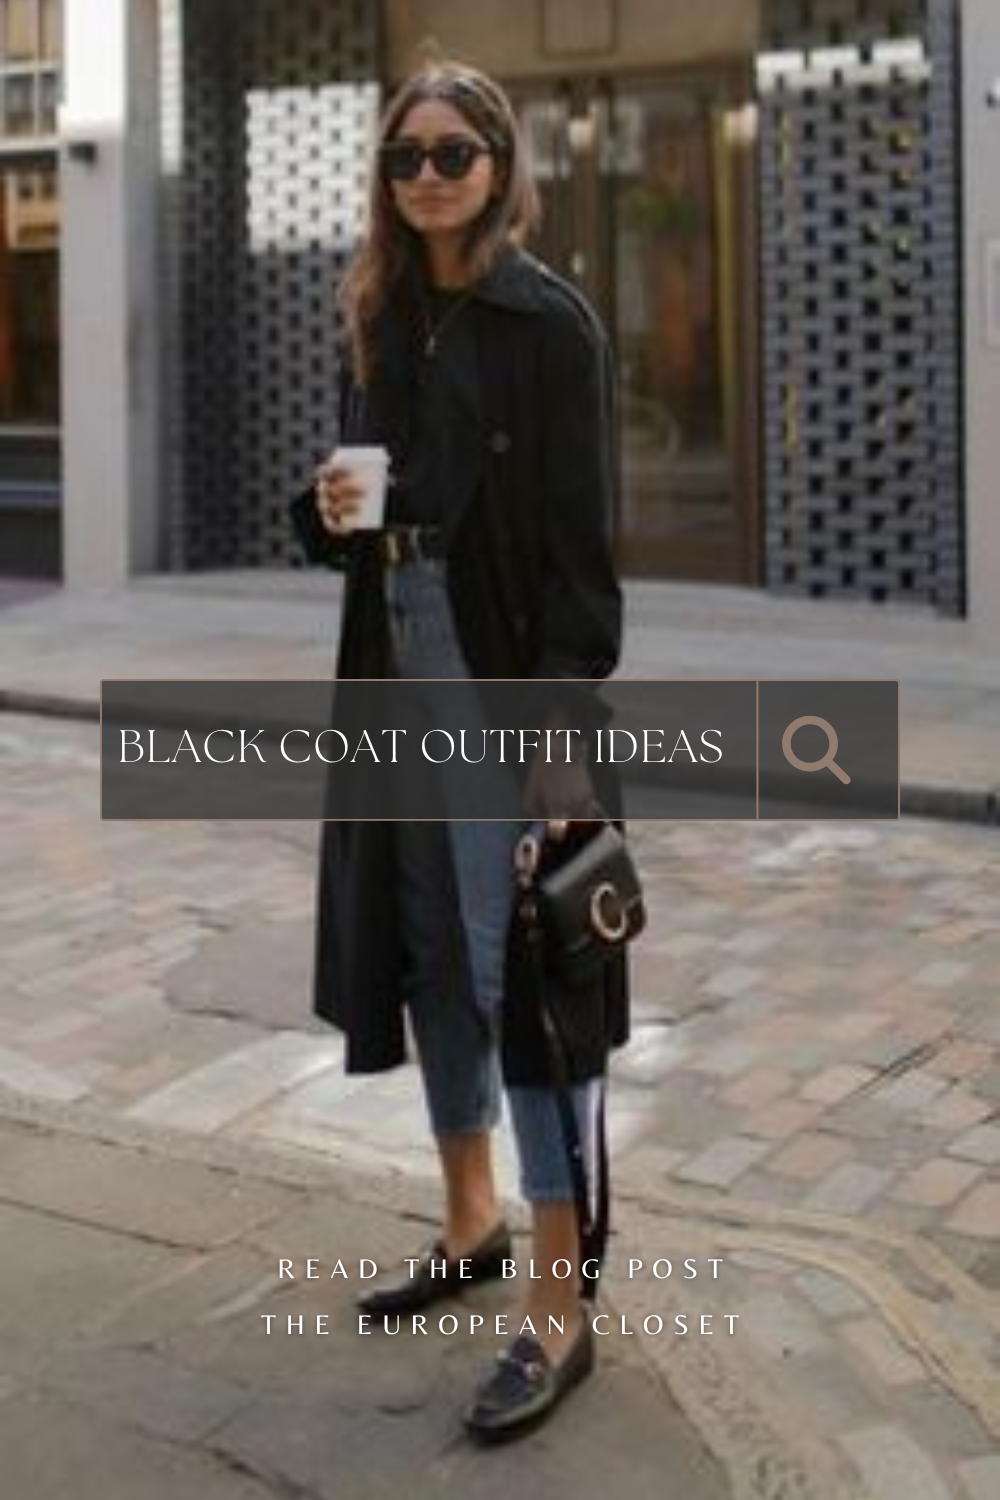 If you're looking for ways on how to wear a black coat, we've got you covered. Here are some amazing black coat outfit ideas for fall and winter 2022